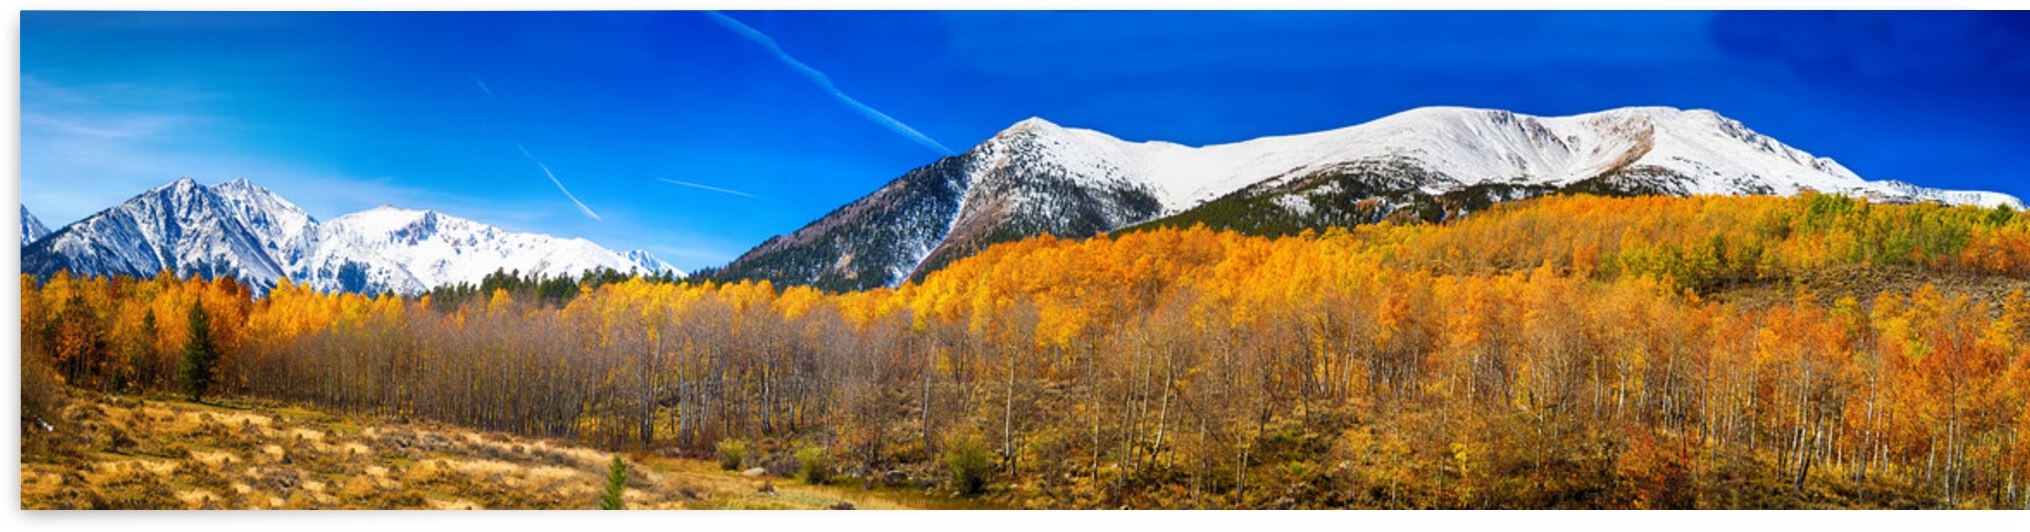 Colorado Rocky Mountain Independence Pass Pano by Bo Insogna